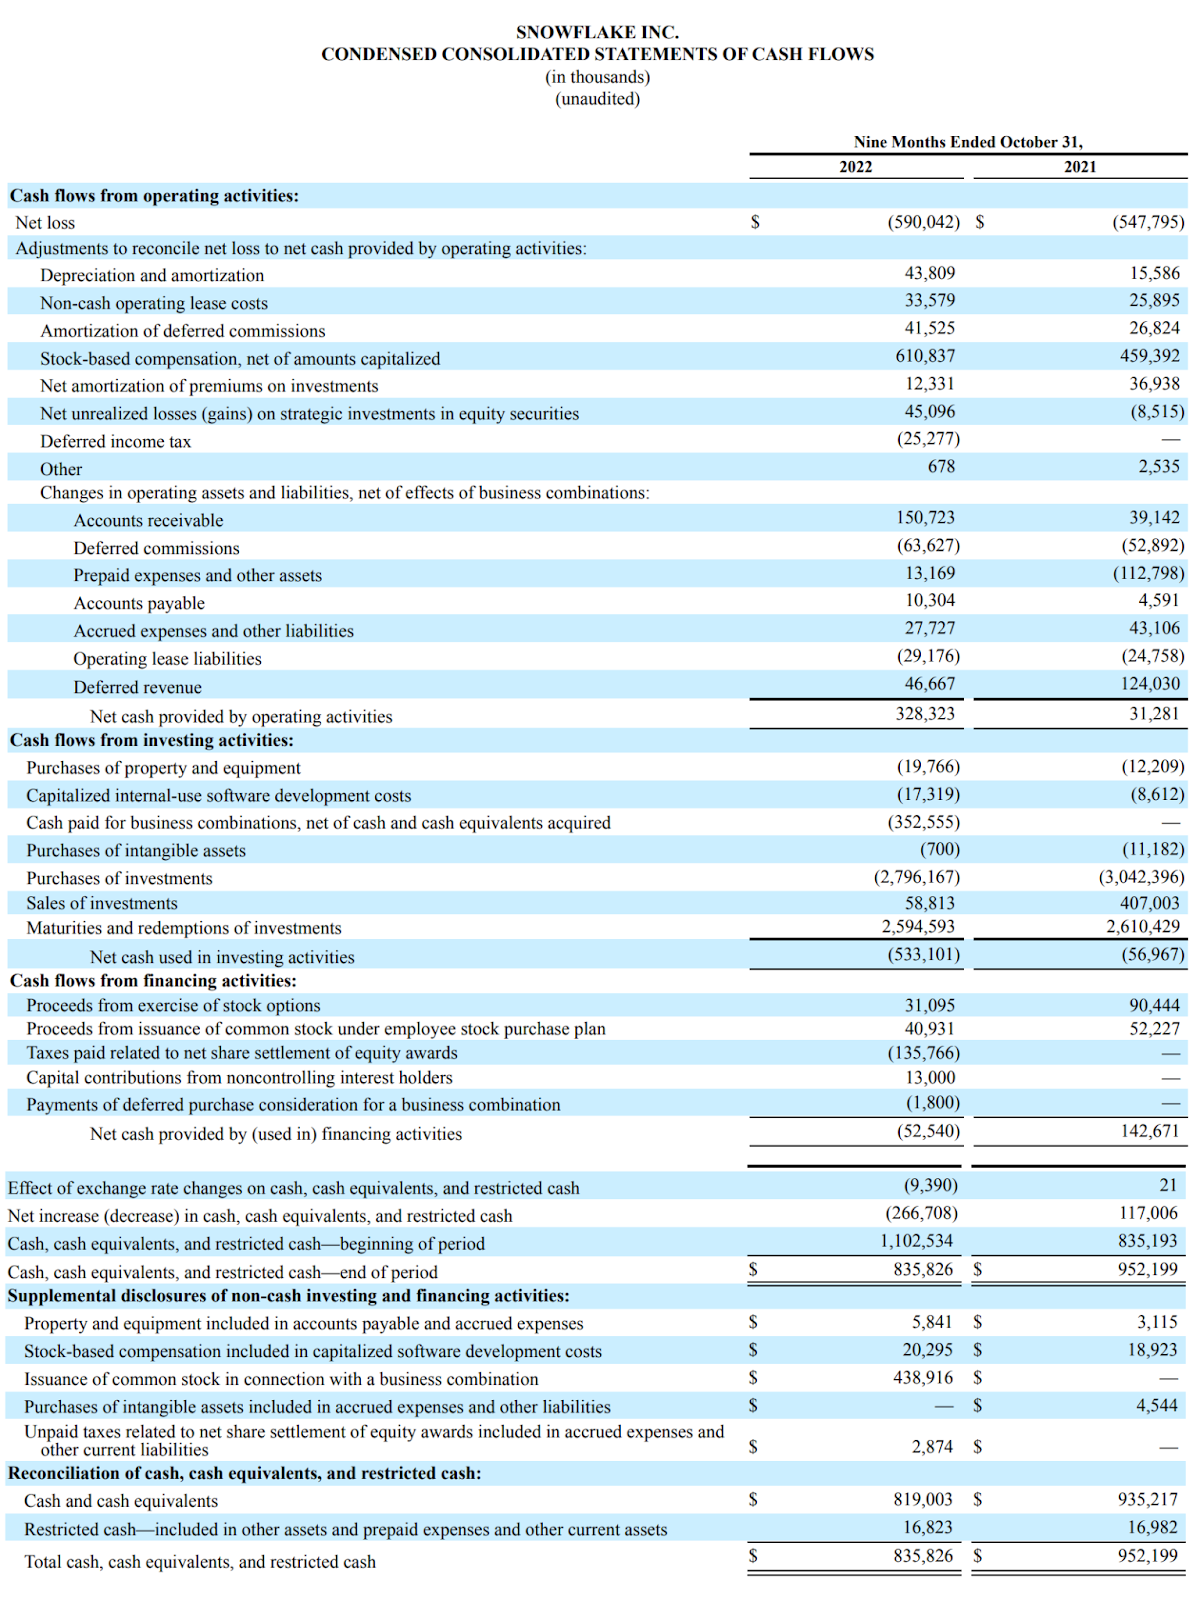 Example cash flow statement from Snowflake